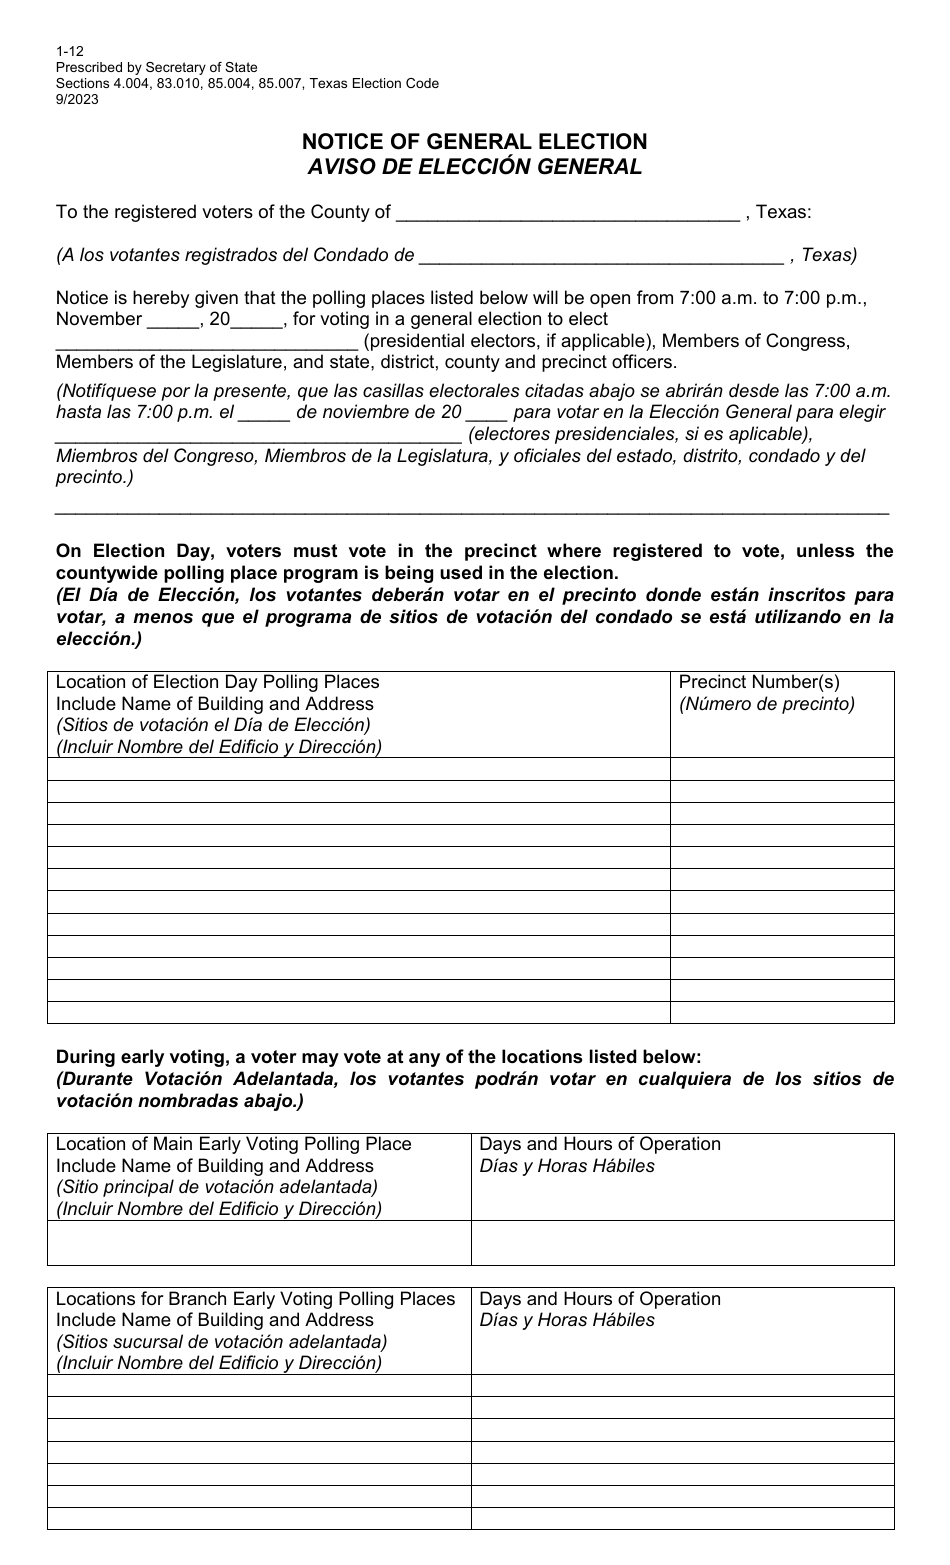 Form 1-12 Notice of General Election - Texas (English / Spanish), Page 1